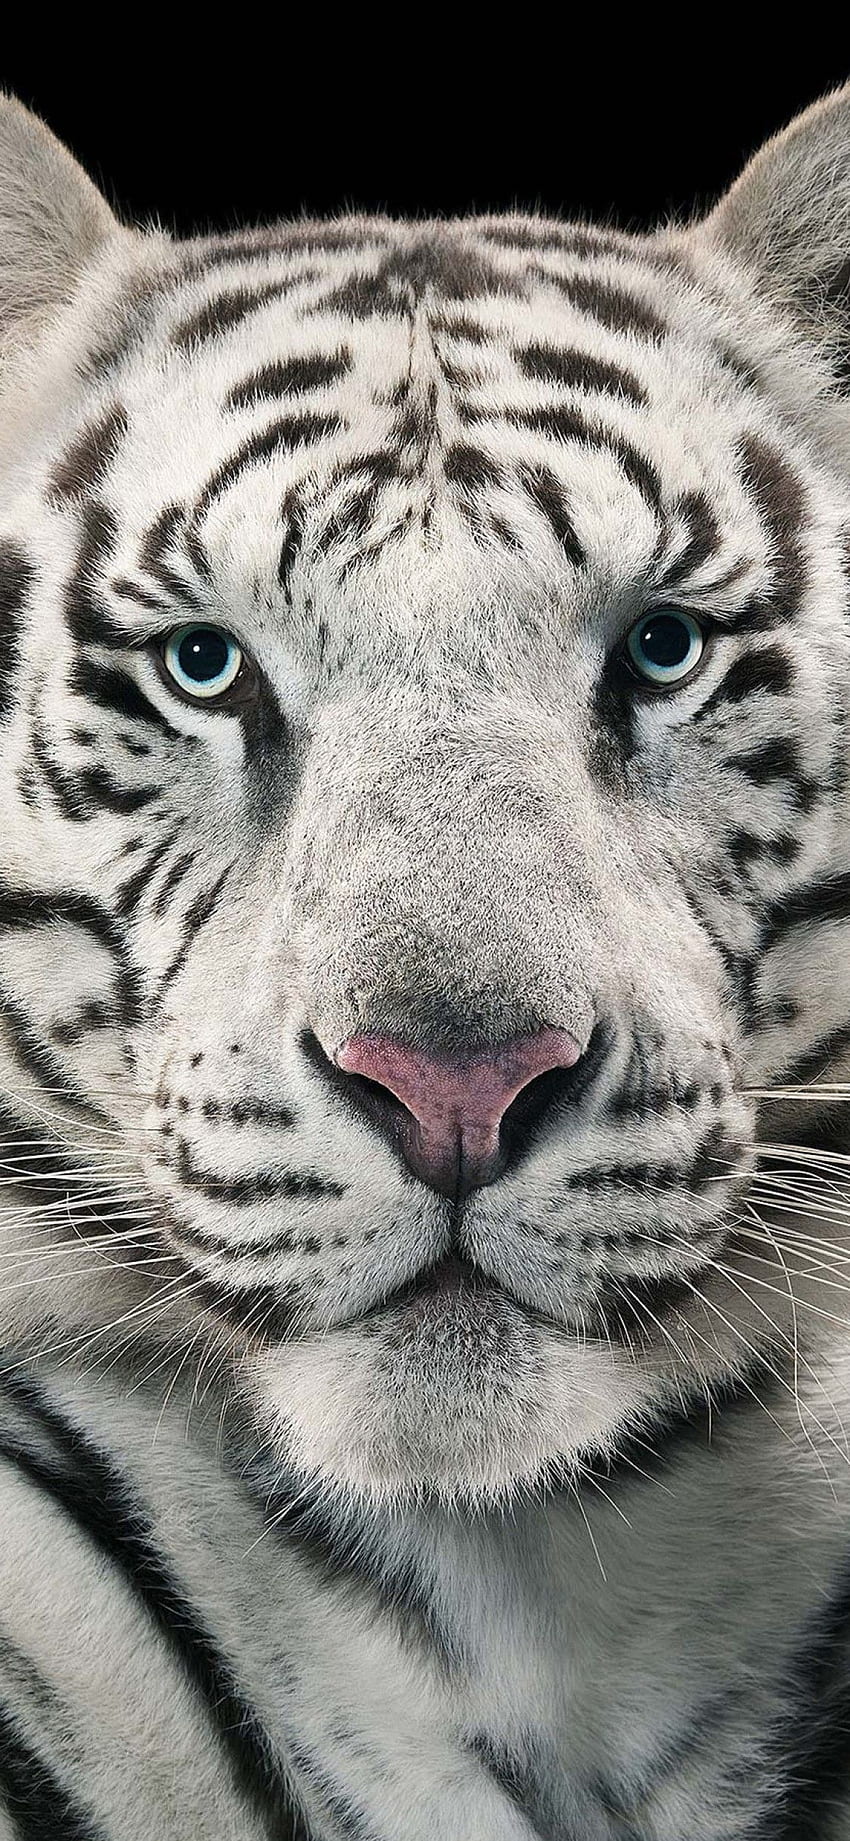 Tiger 1125x2436 Resolution Wallpapers Iphone XS,Iphone 10,Iphone X